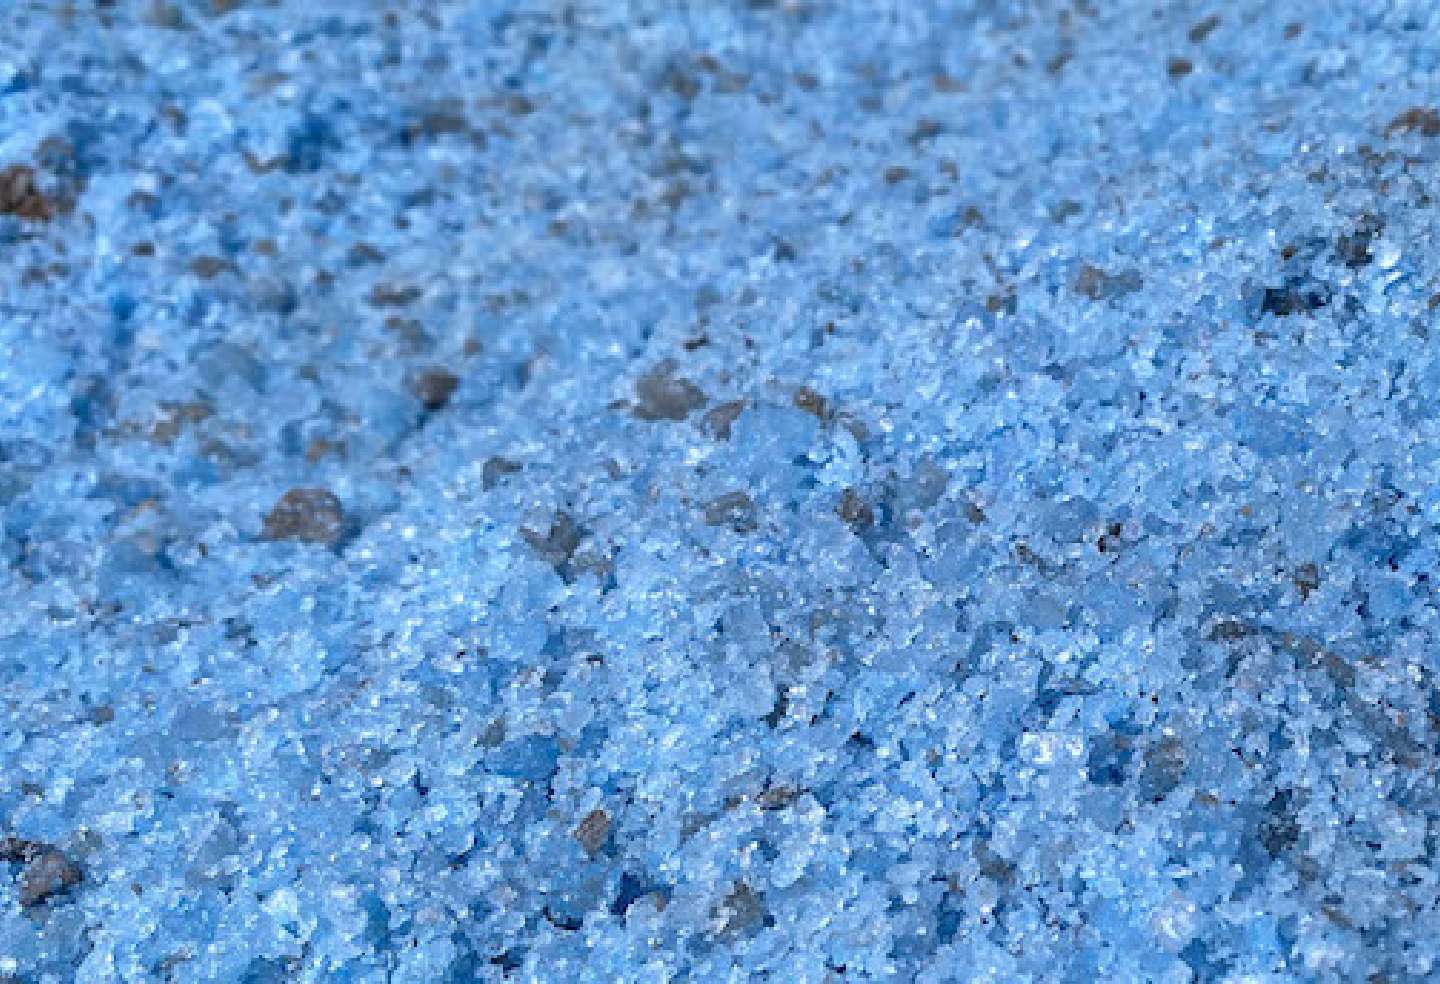 Blue Thawrox crystals dispersed on gravel